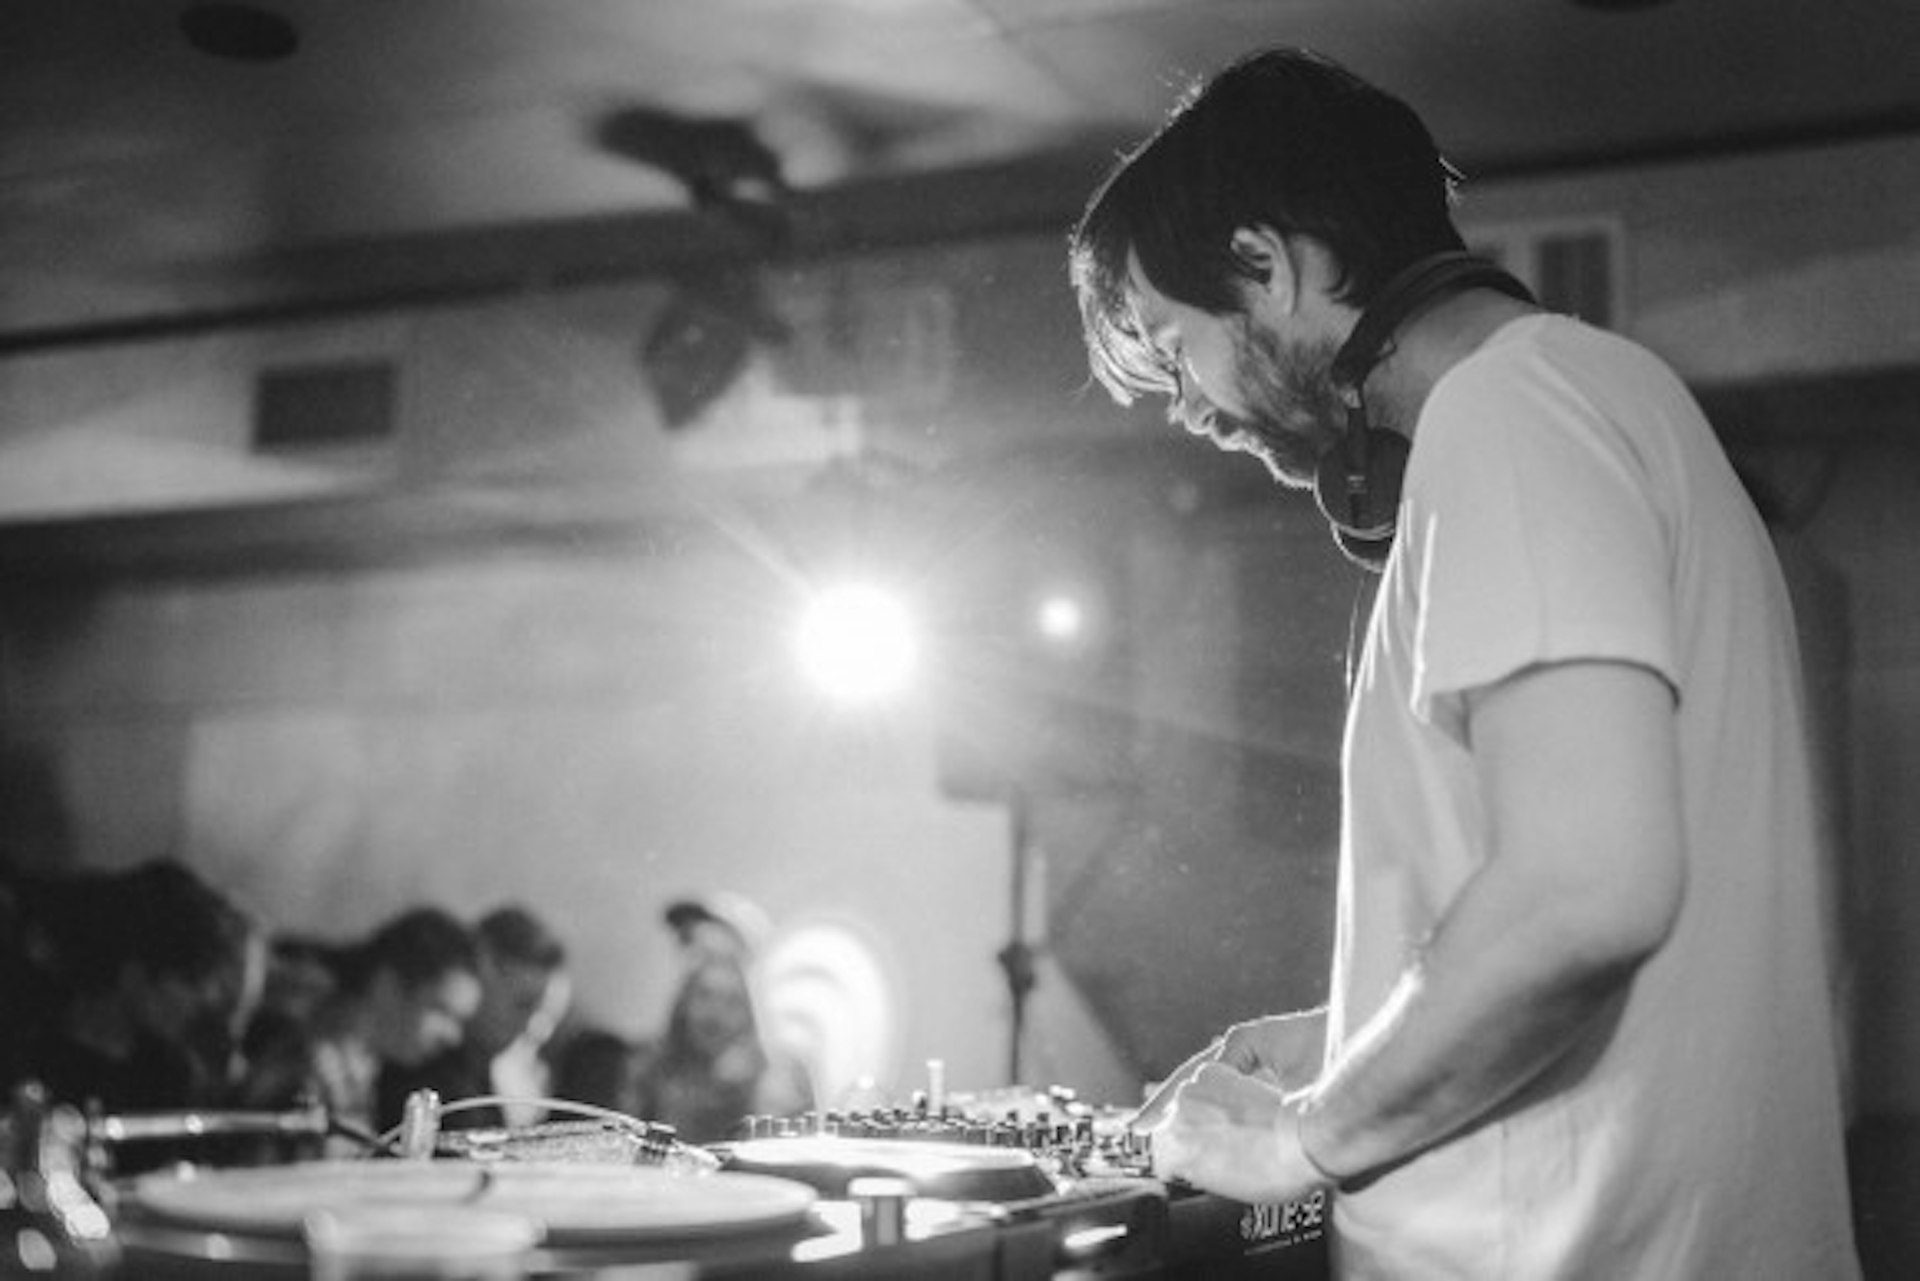 Techno producer Benjamin Damage describes his Berlin, a free city united by music